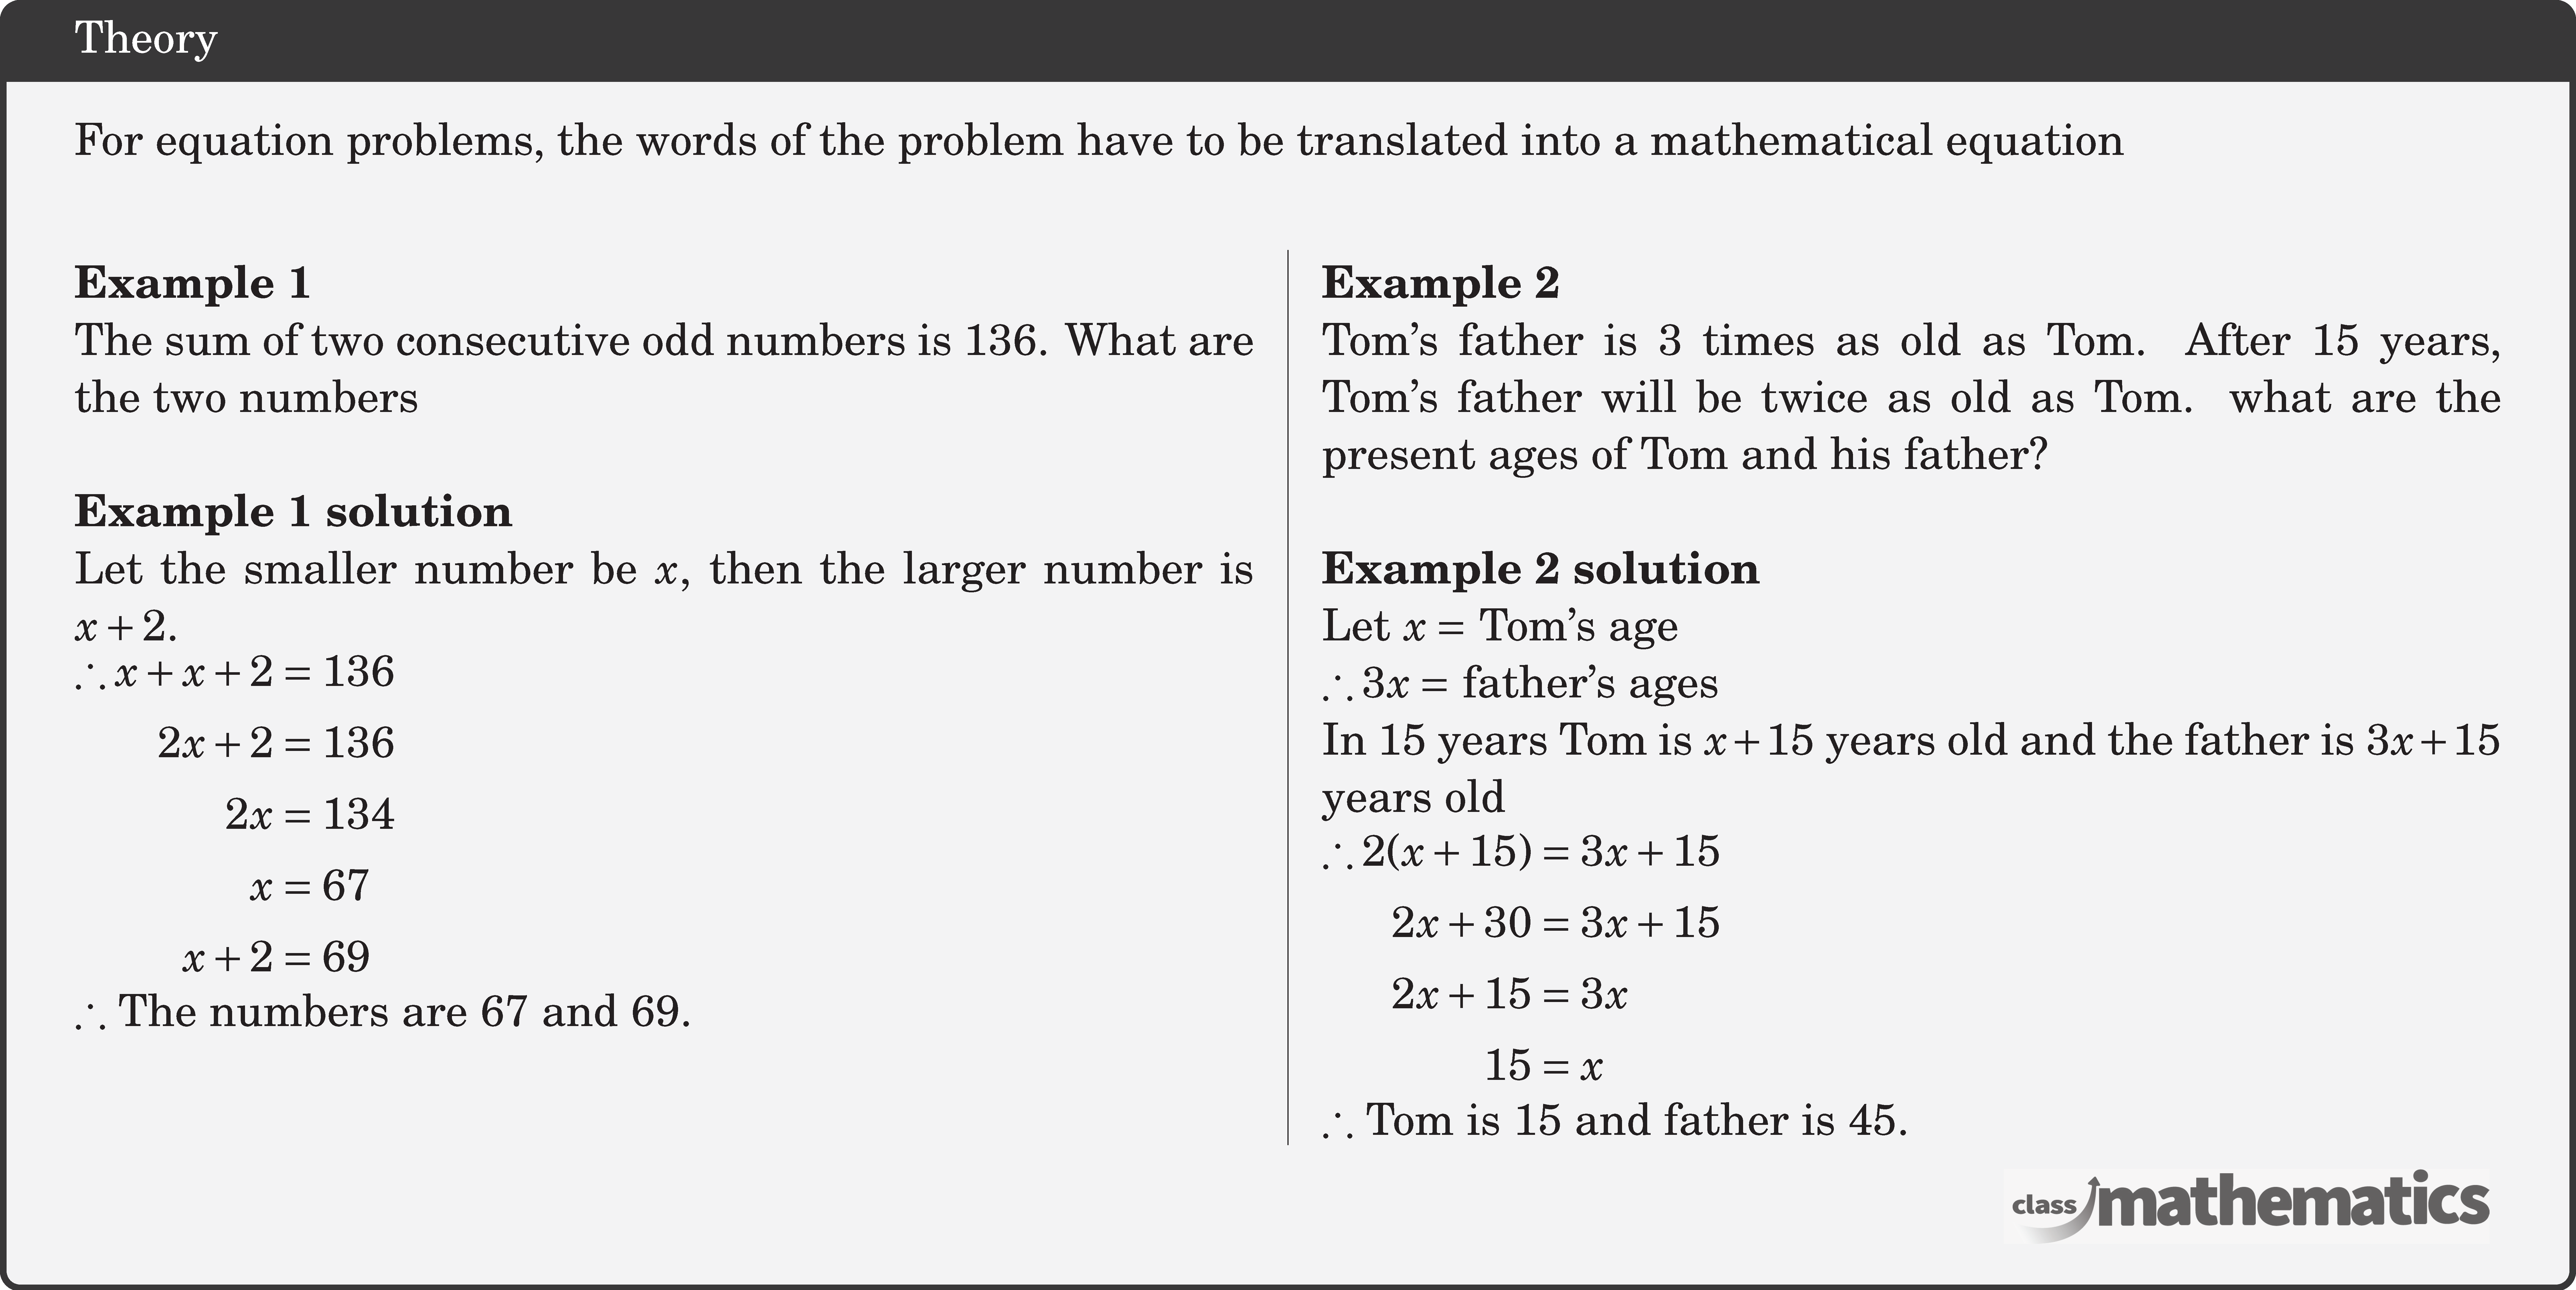 For equation problems, the words of the problem have to be translated into a mathematical equation\\  \begin{multicols}{2}  \textbf{Example 1}\\ The sum of two consecutive odd numbers is 136. What are the two numbers\\  \textbf{Example 1 solution}\\ Let the smaller number be \(x\), then the larger number is \(x+2\).\\ \(\begin{aligned} \therefore  x+x+2 & =136 \\ 2 x+2 & =136 \\ 2 x & =134 \\ x & =67 \\ x+2 & =69 \end{aligned}\)\\ \(\therefore\) The numbers are 67 and 69.  \columnbreak \textbf{Example 2}\\ Tom's father is 3 times as old as Tom. After 15 years, Tom's father will be twice as old as Tom. what are the present ages of Tom and his father?\\  \textbf{Example 2 solution}\\ Let \(x=\) Tom's age \\ \(\therefore 3 x=\) father's ages\\ In \(15\) years Tom is \(x+15\) years old and the father is \(3 x+15\) years old\\ \(\begin{aligned} \therefore 2(x+15) & =3 x+15 \\ 2 x+30 & =3 x+15 \\ 2 x+15 & =3 x \\ 15 & =x \end{aligned}\)\\ \(\therefore\) Tom is 15 and father is 45.  \end{multicols}